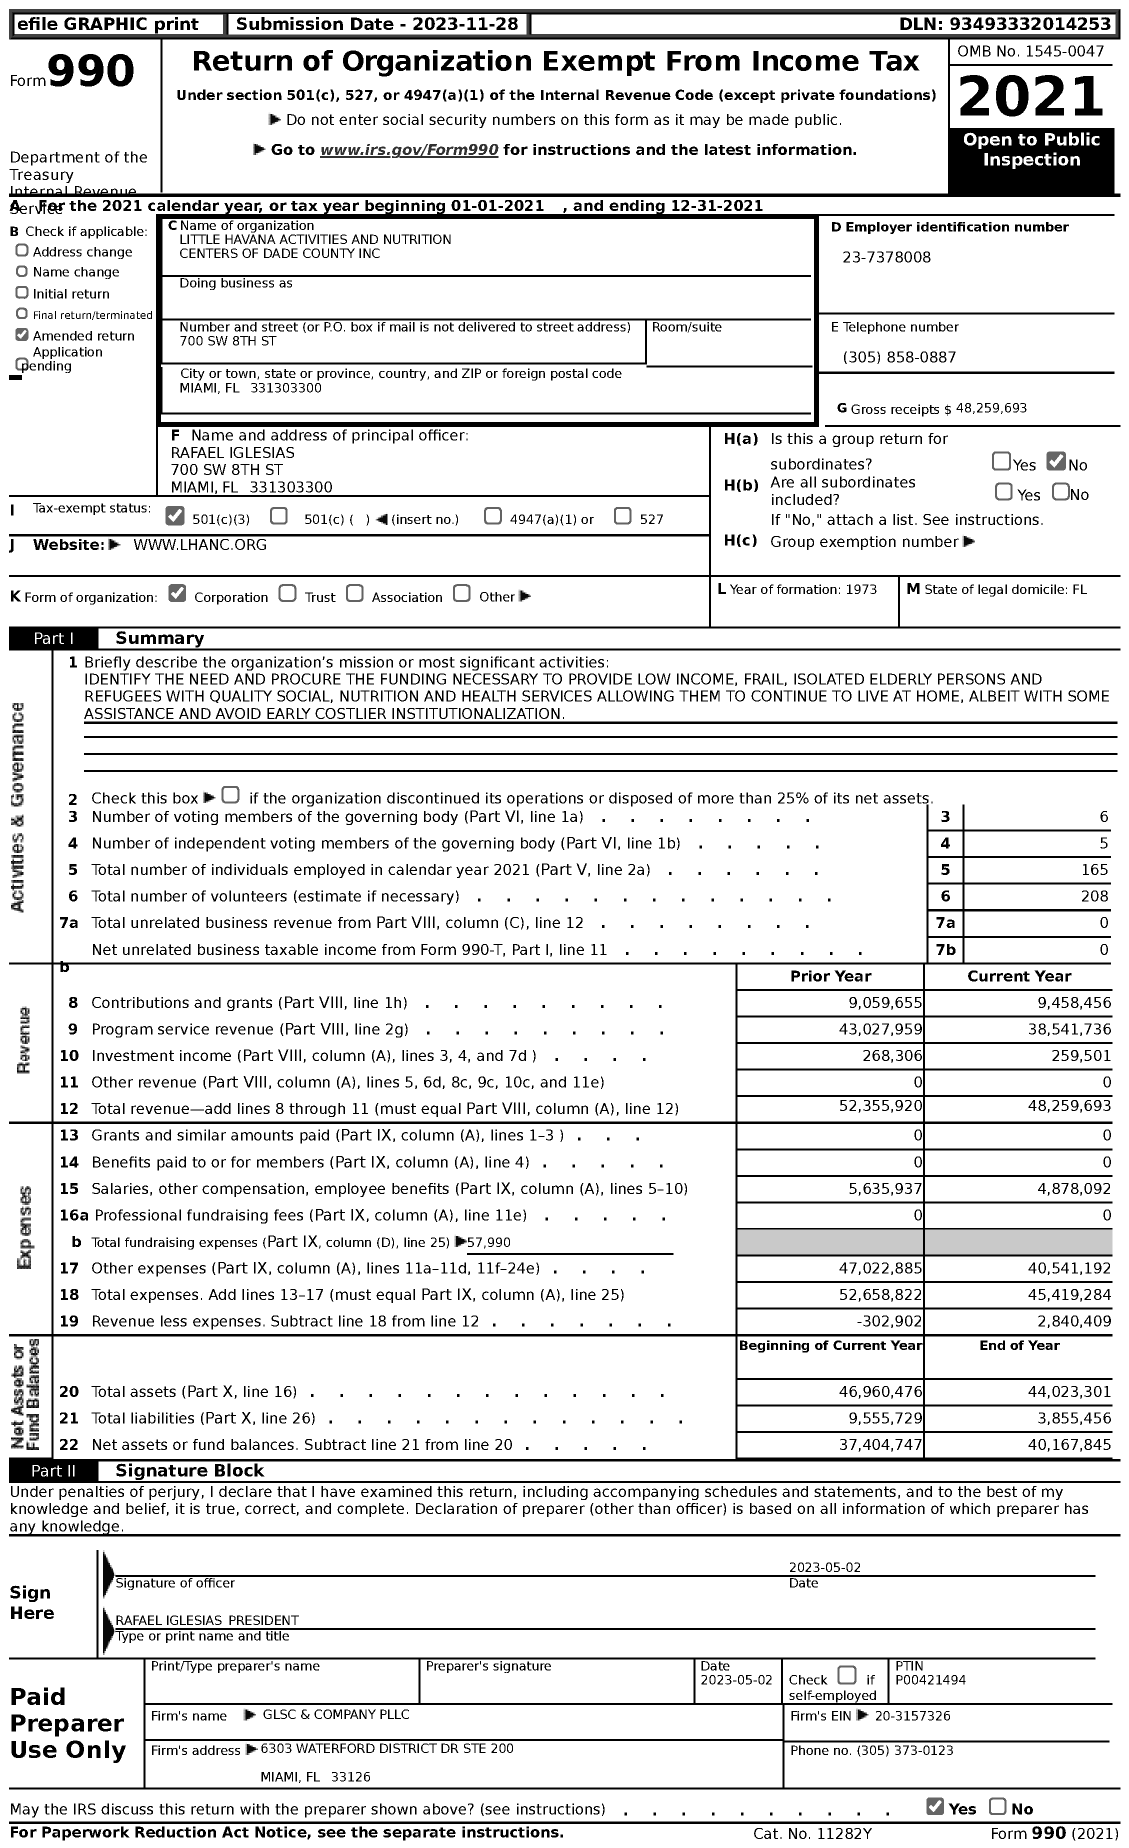 Image of first page of 2021 Form 990 for Little Havana Activities and Nutrition Centers (LHANC)